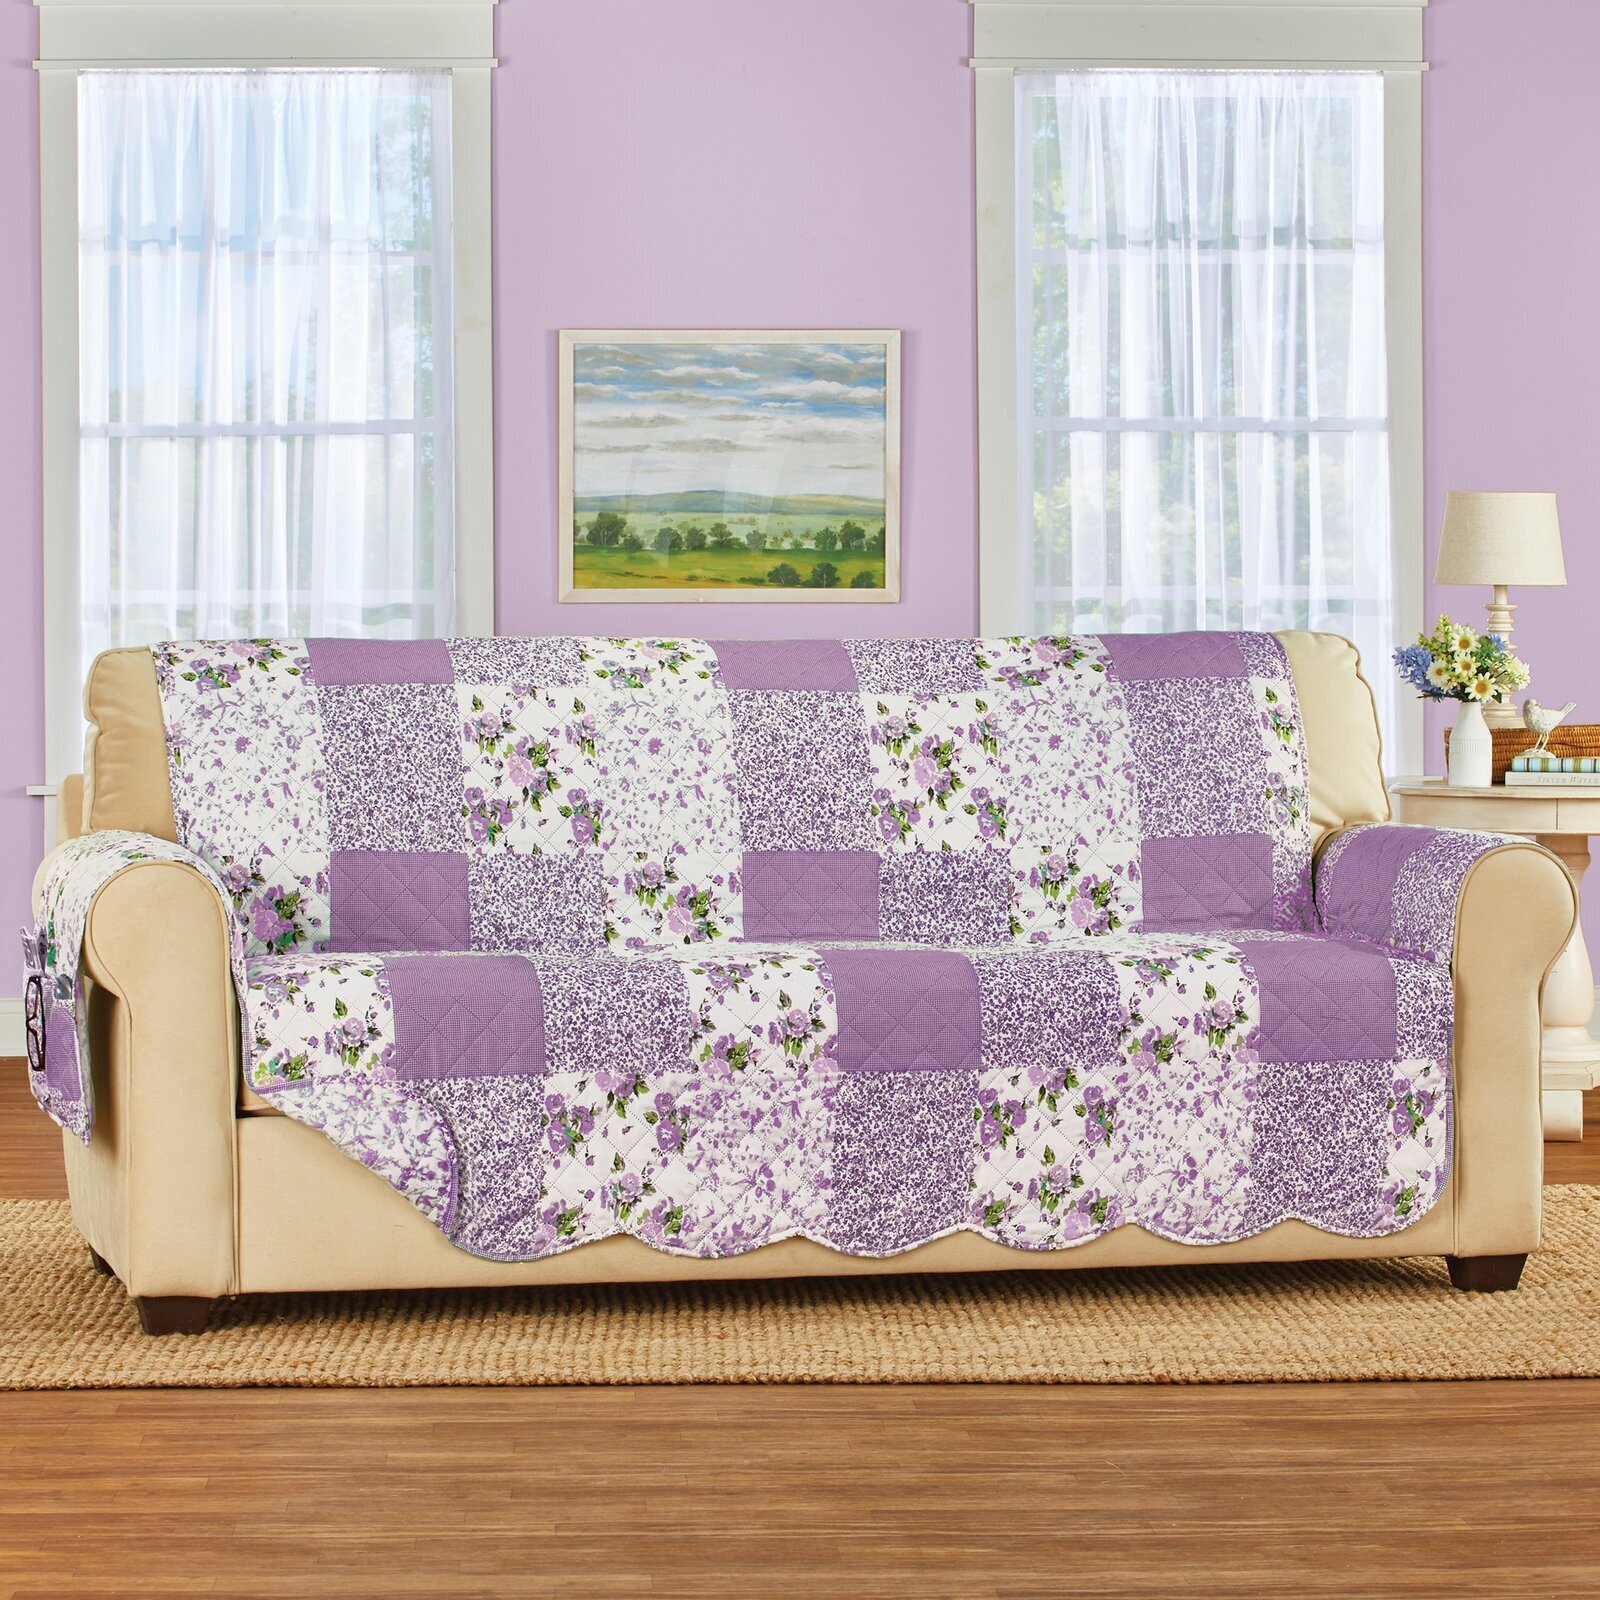 Lavender Quilt Style Country Sofa Covers 